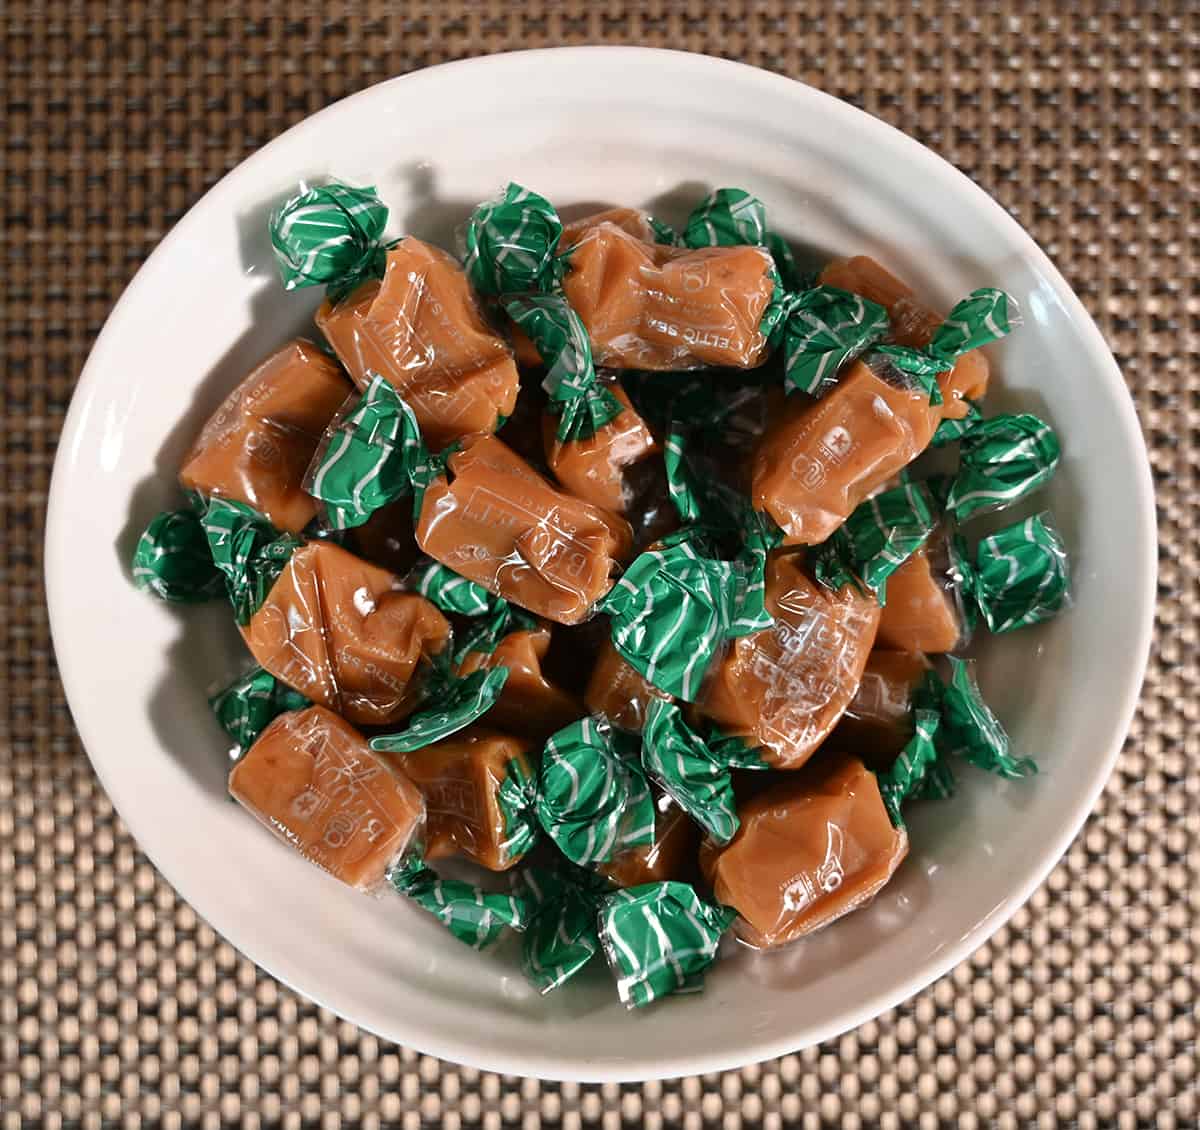 Top down image of a bowl of caramel candies wrapped in clear plastic.